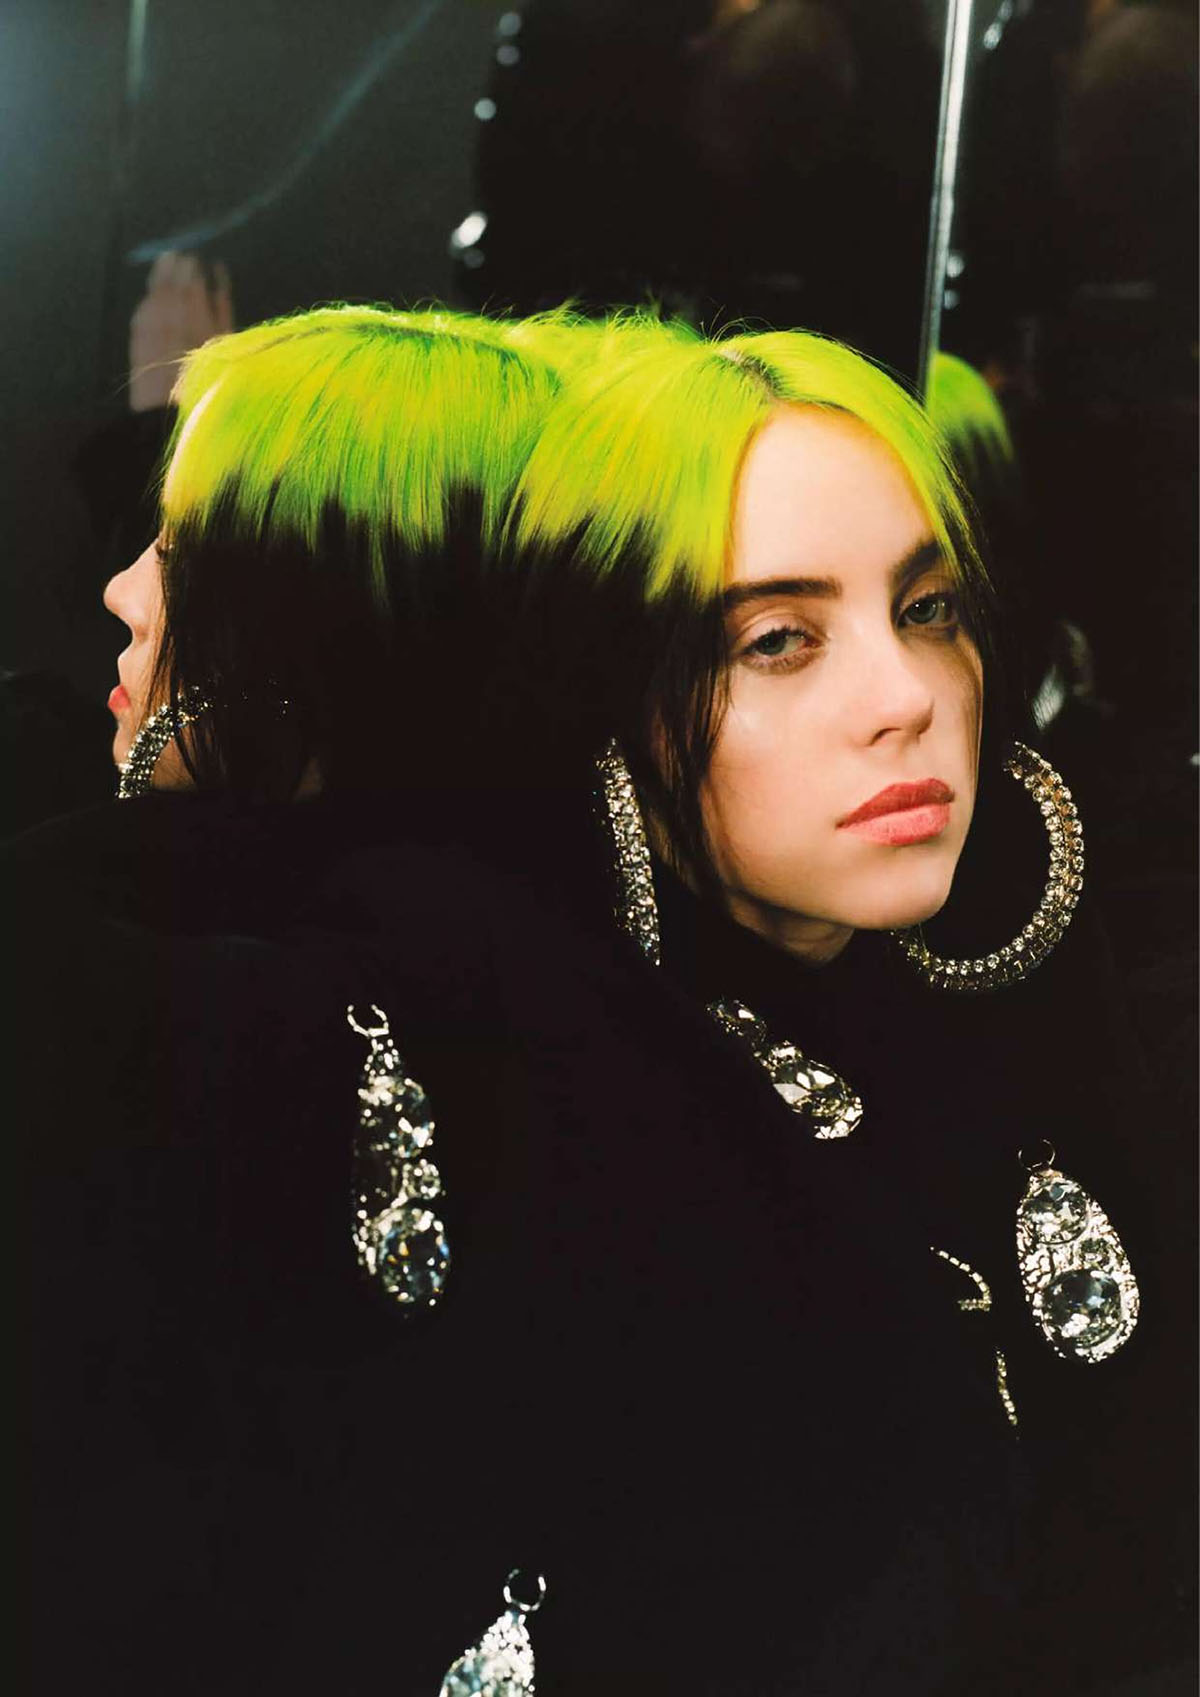 Billie Eilish covers Vanity Fair March 2021 by Quil Lemons